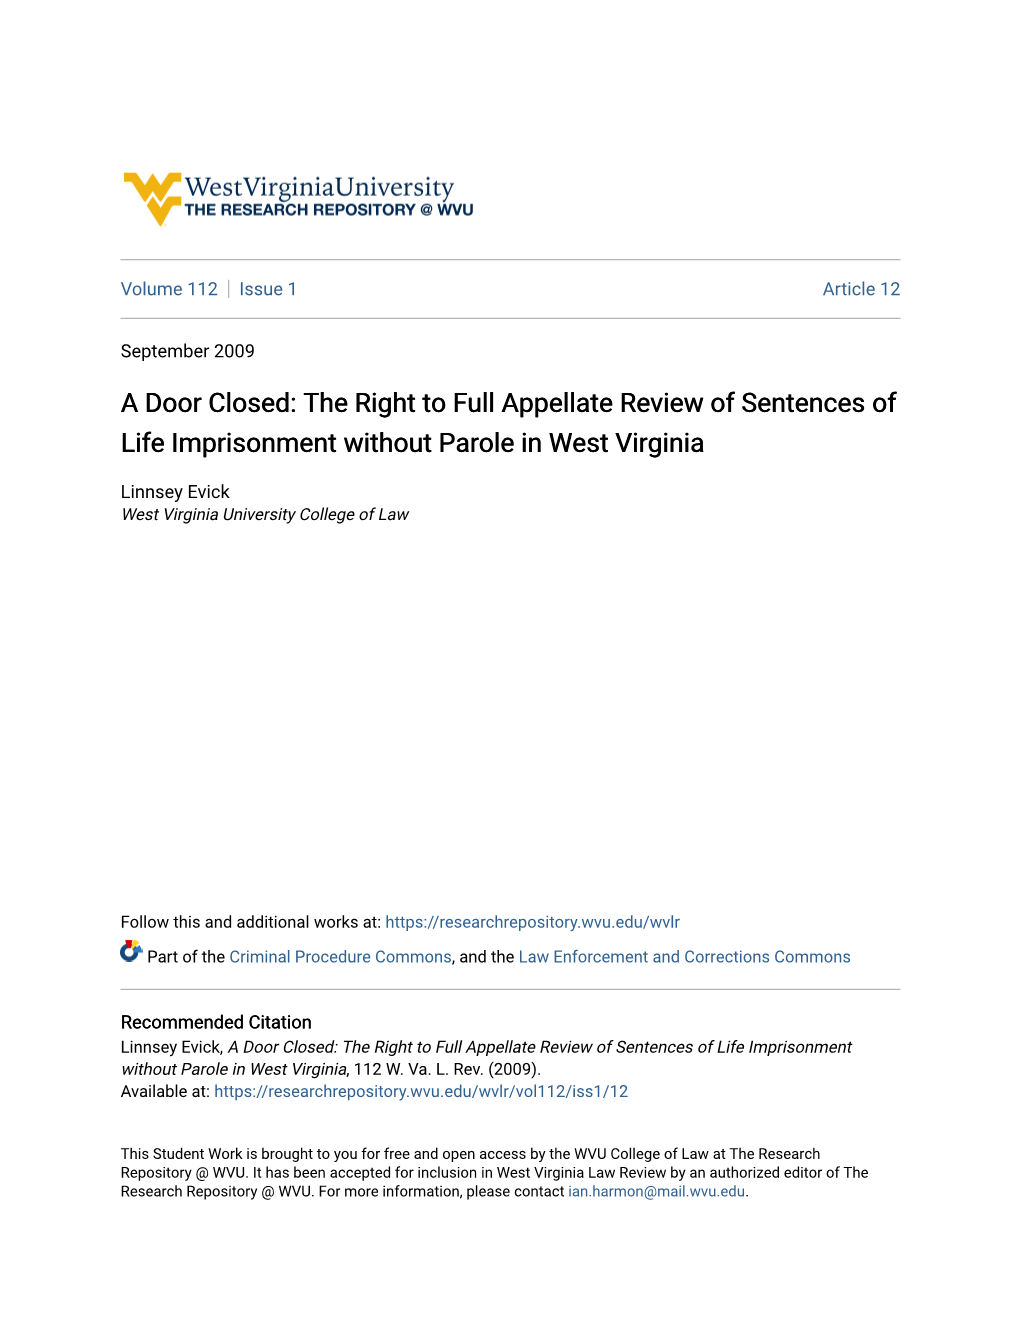 The Right to Full Appellate Review of Sentences of Life Imprisonment Without Parole in West Virginia